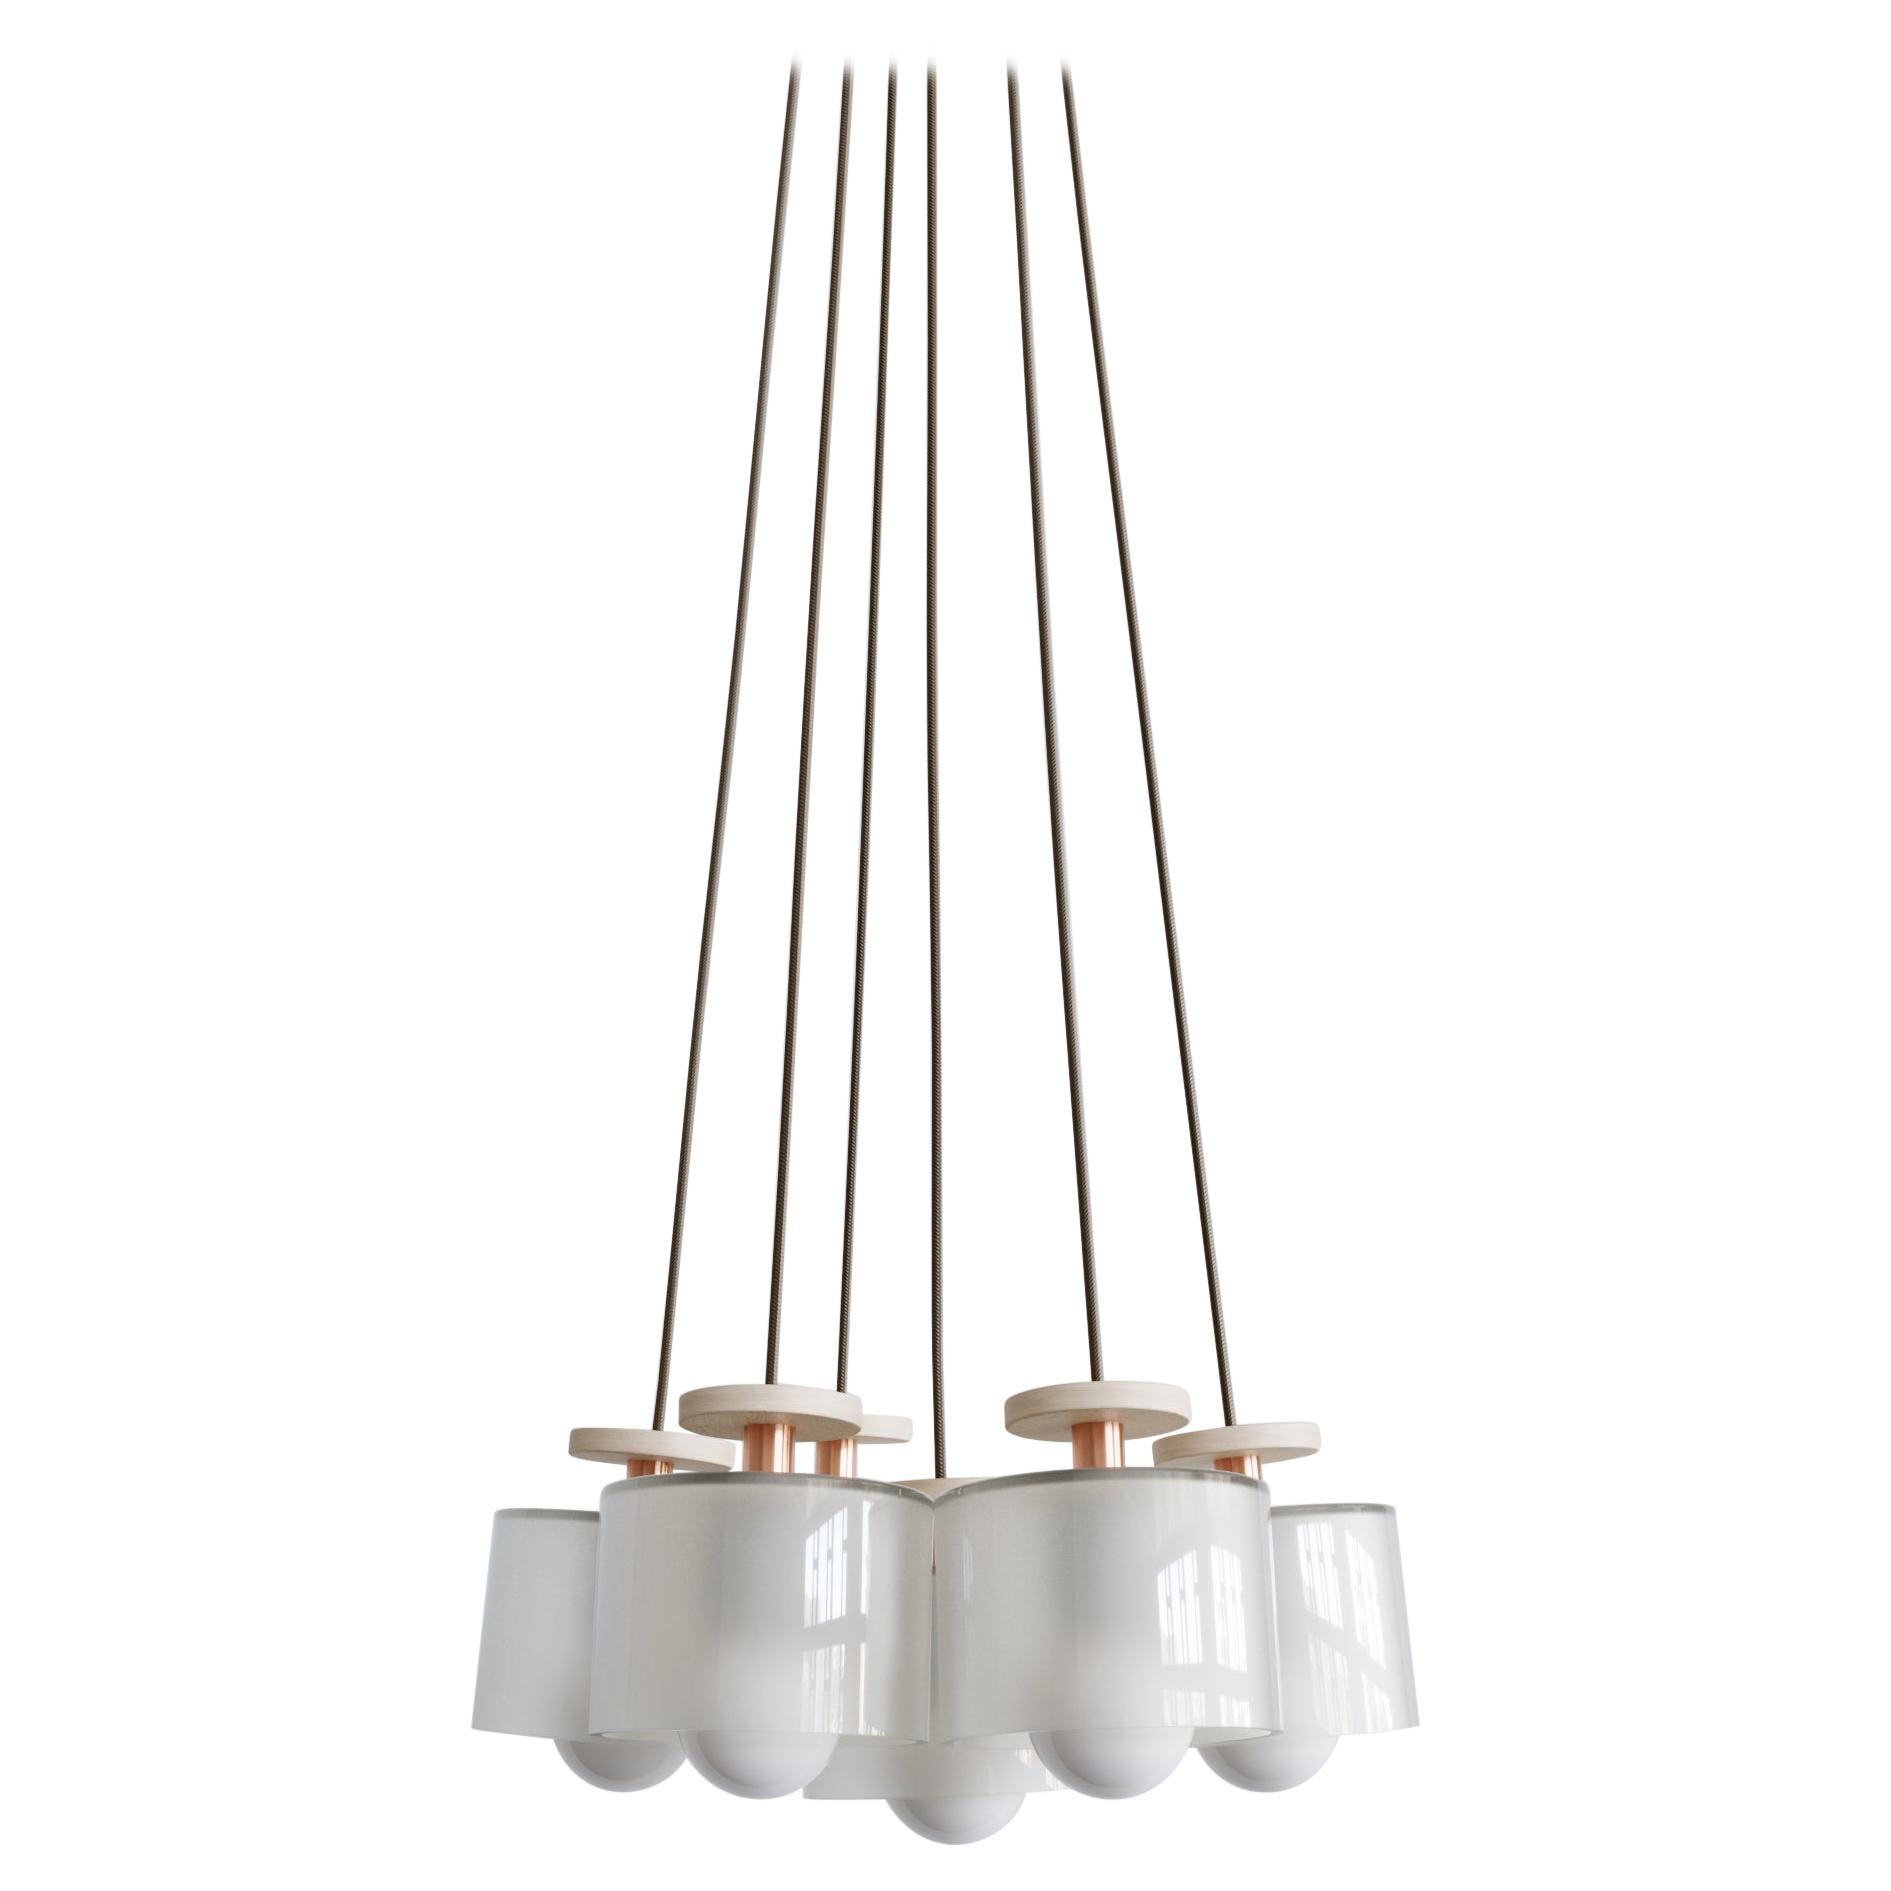 Spun 6-Piece Chandelier Pendant in Frosted Glass Shade, Field Adjustable Light For Sale